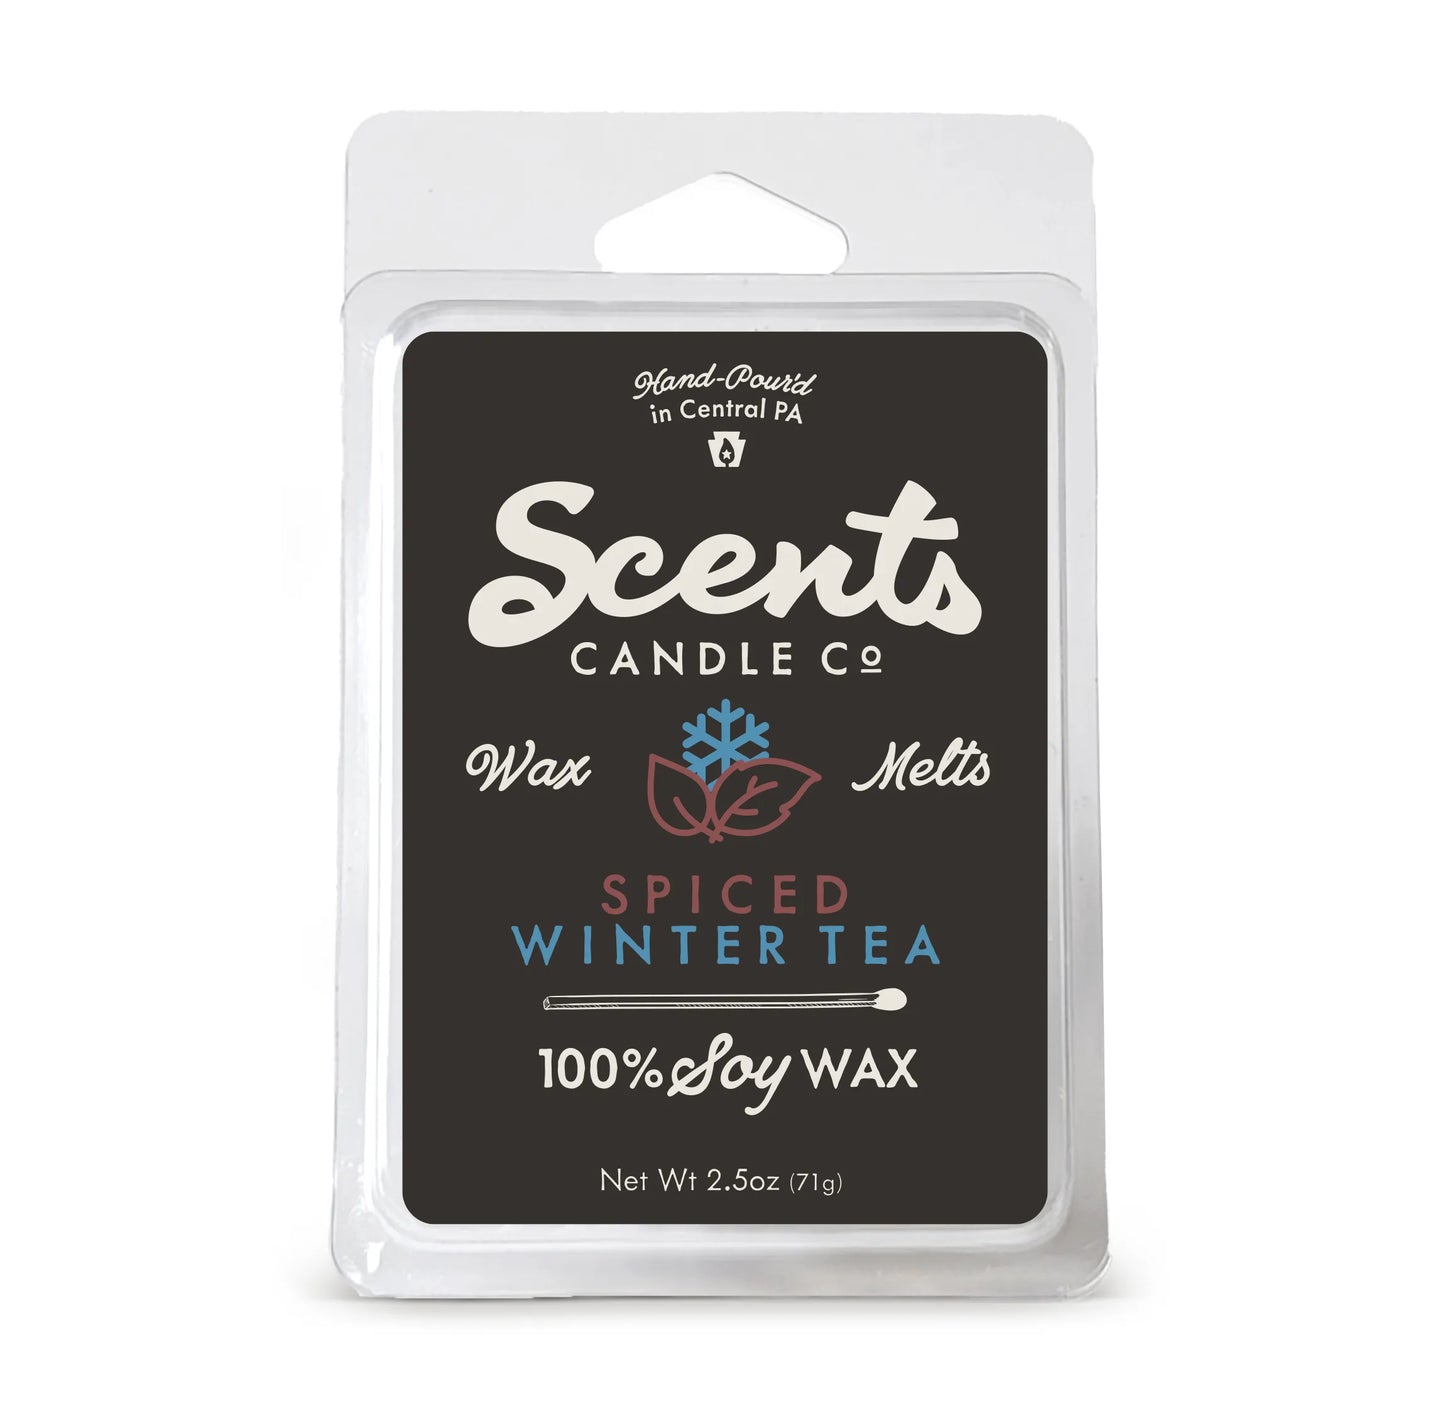 Scents Candle Co. Spiced Winter Tea Wax Melt